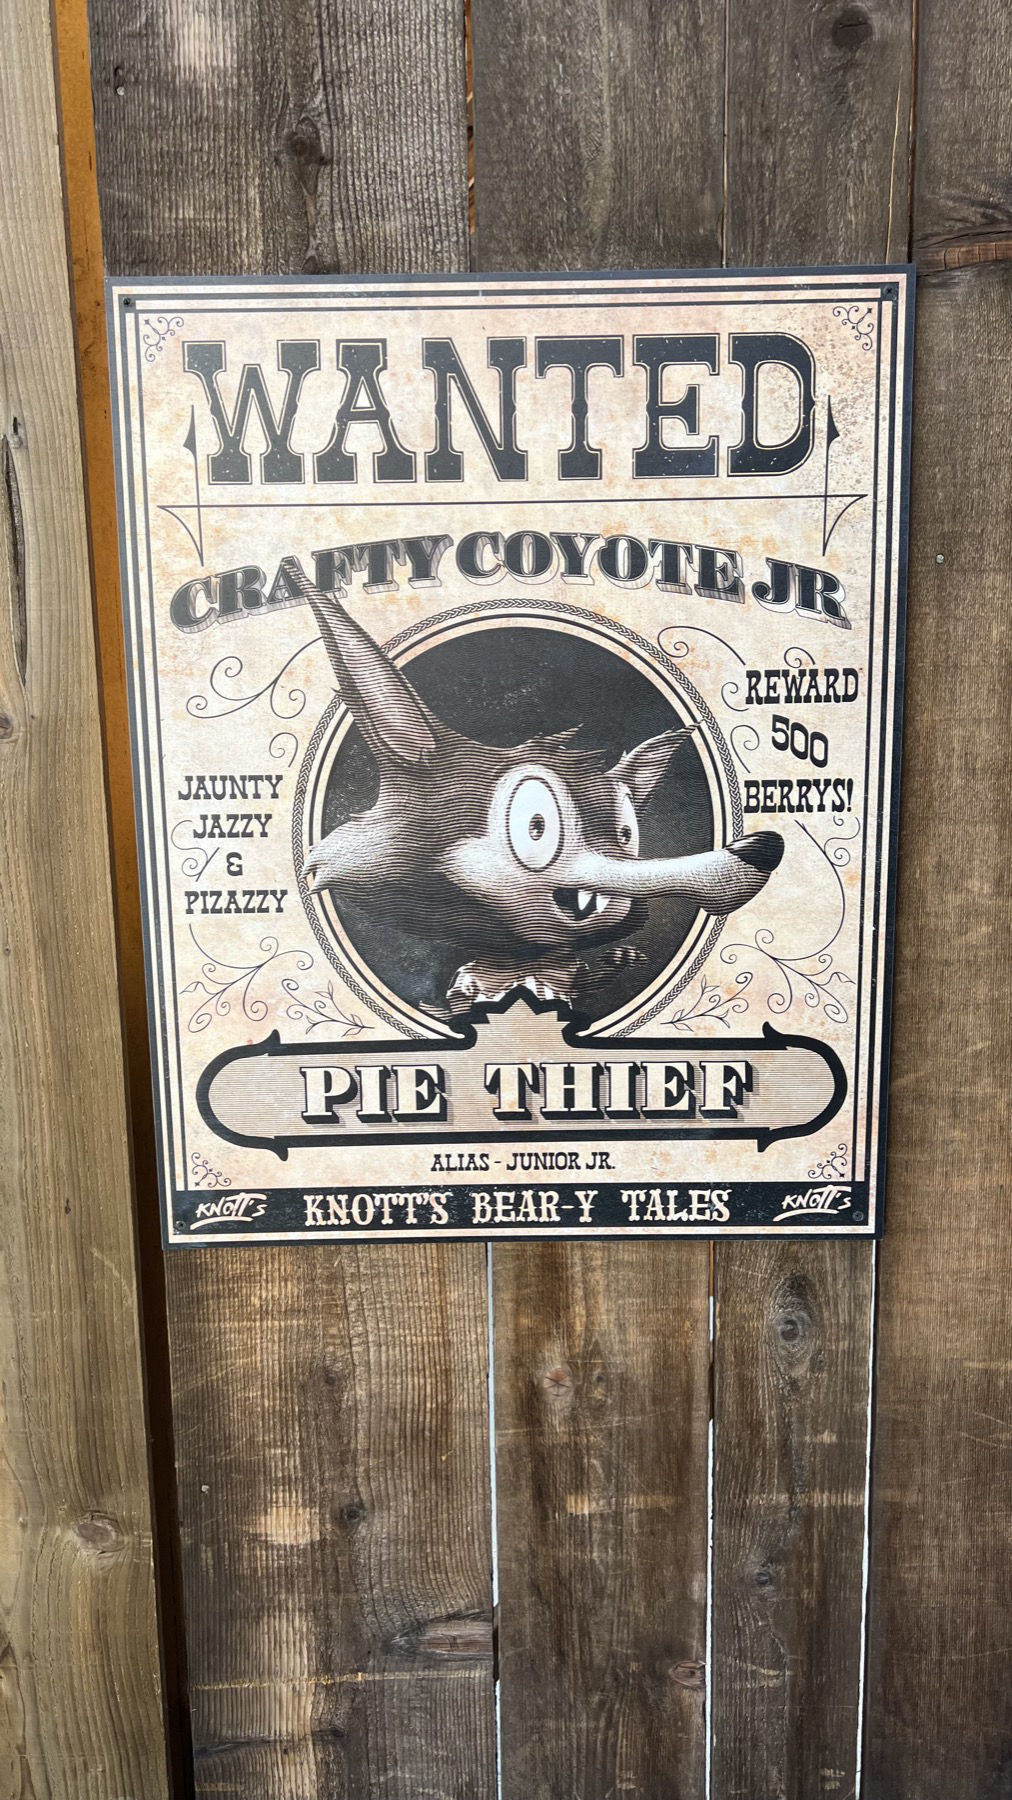 Wanted Crafty Coyote